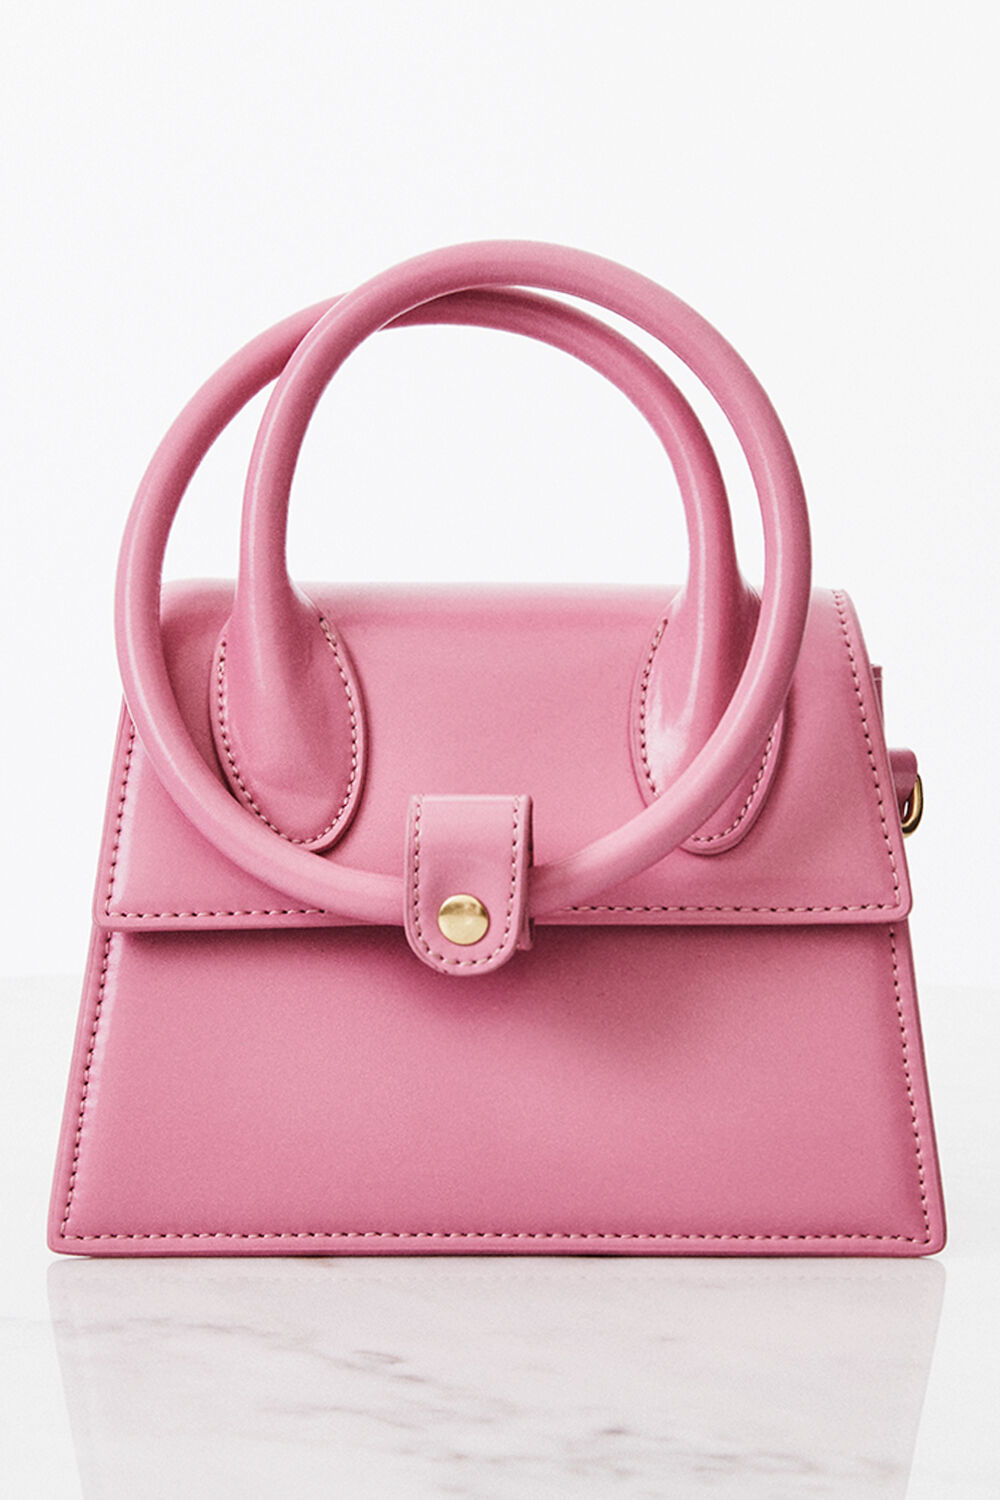 THE TESSA BAG in colour PARADISE PINK